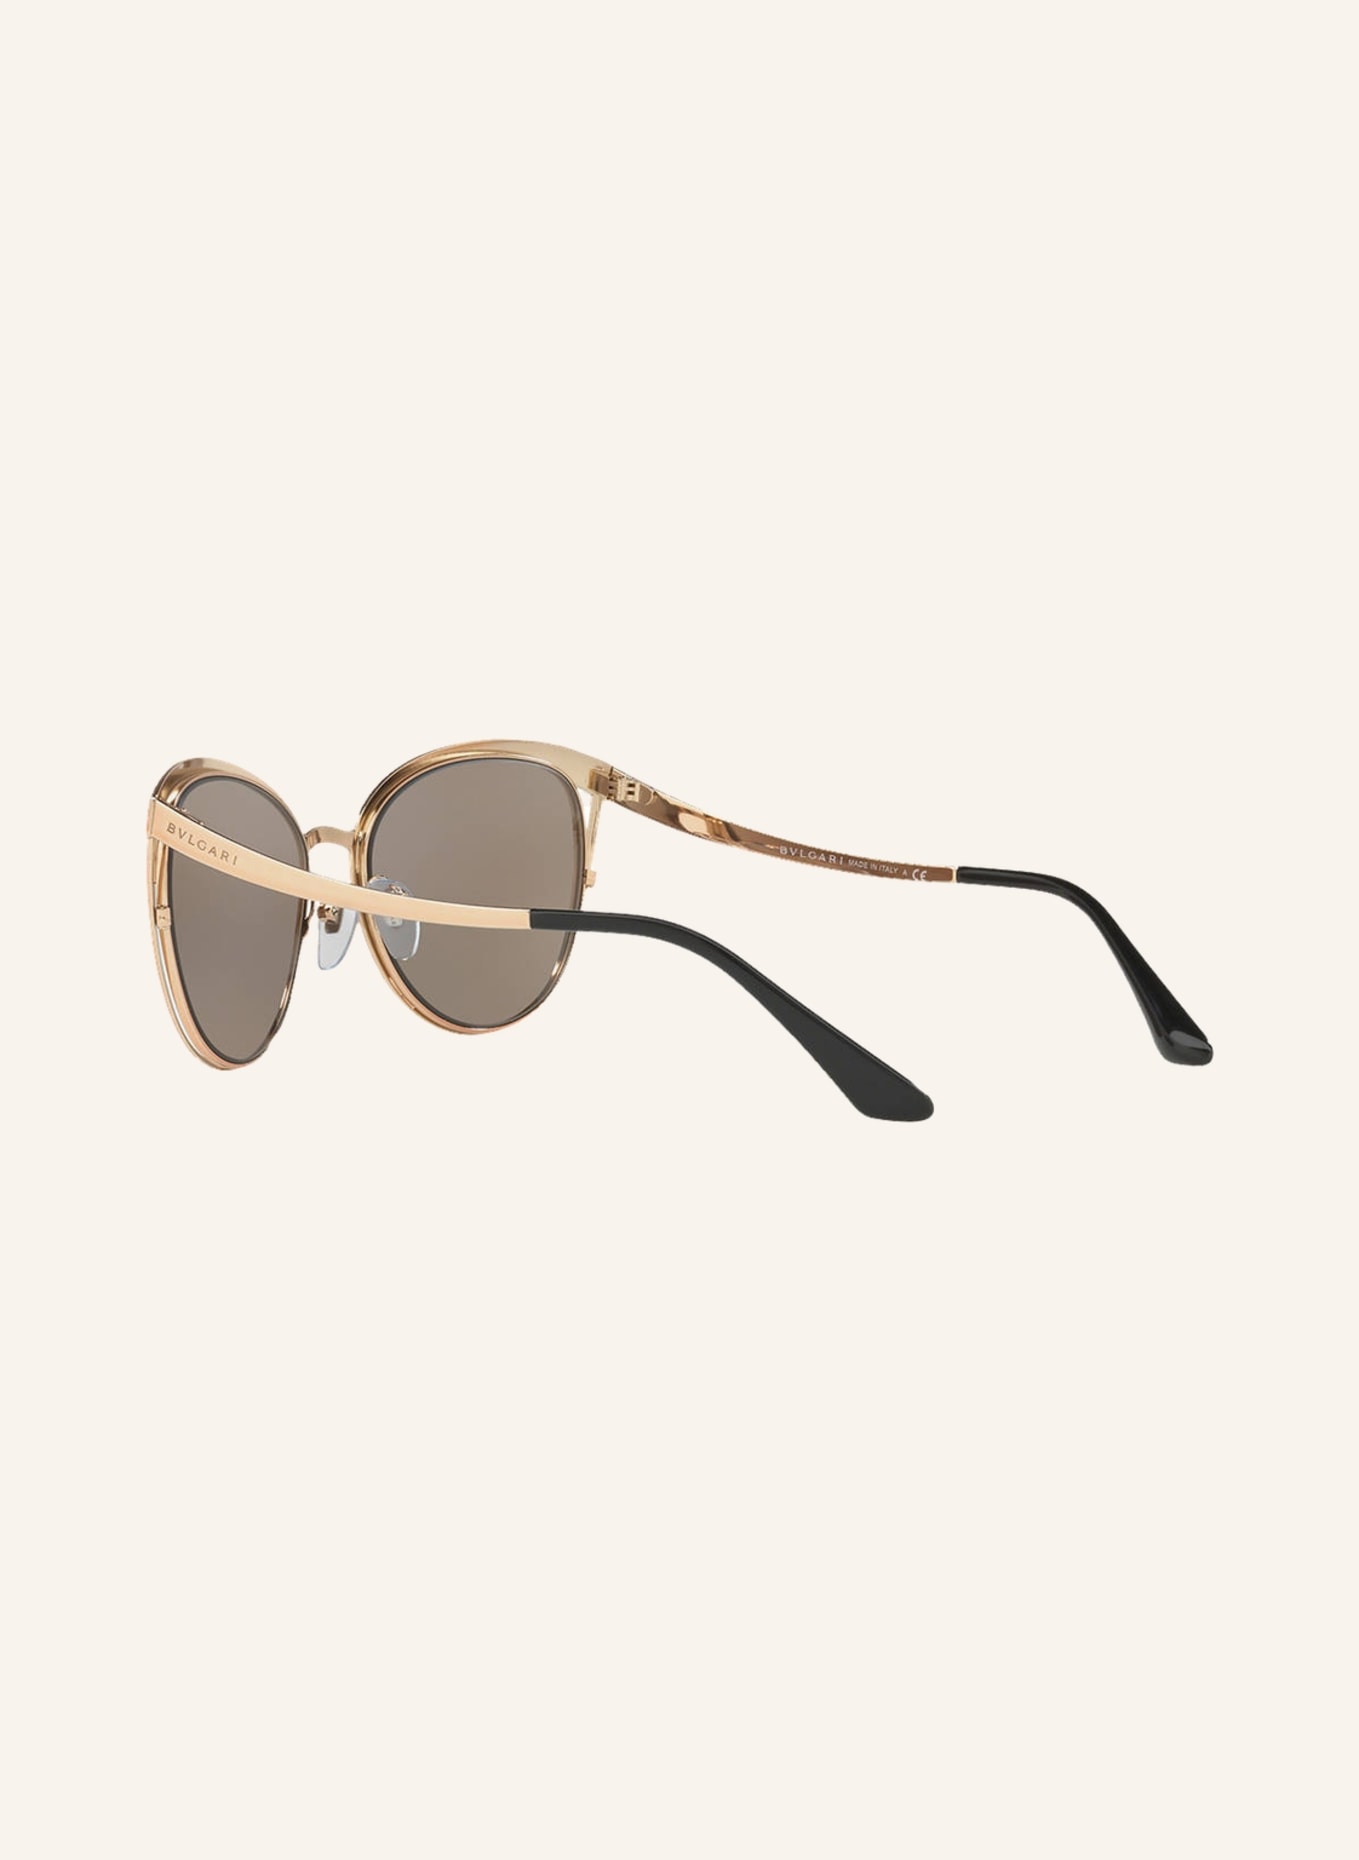 BVLGARI Sunglasses BV 6083, Color: 20145A - GOLD/LIGHT BROWN MIRRORED (Image 4)